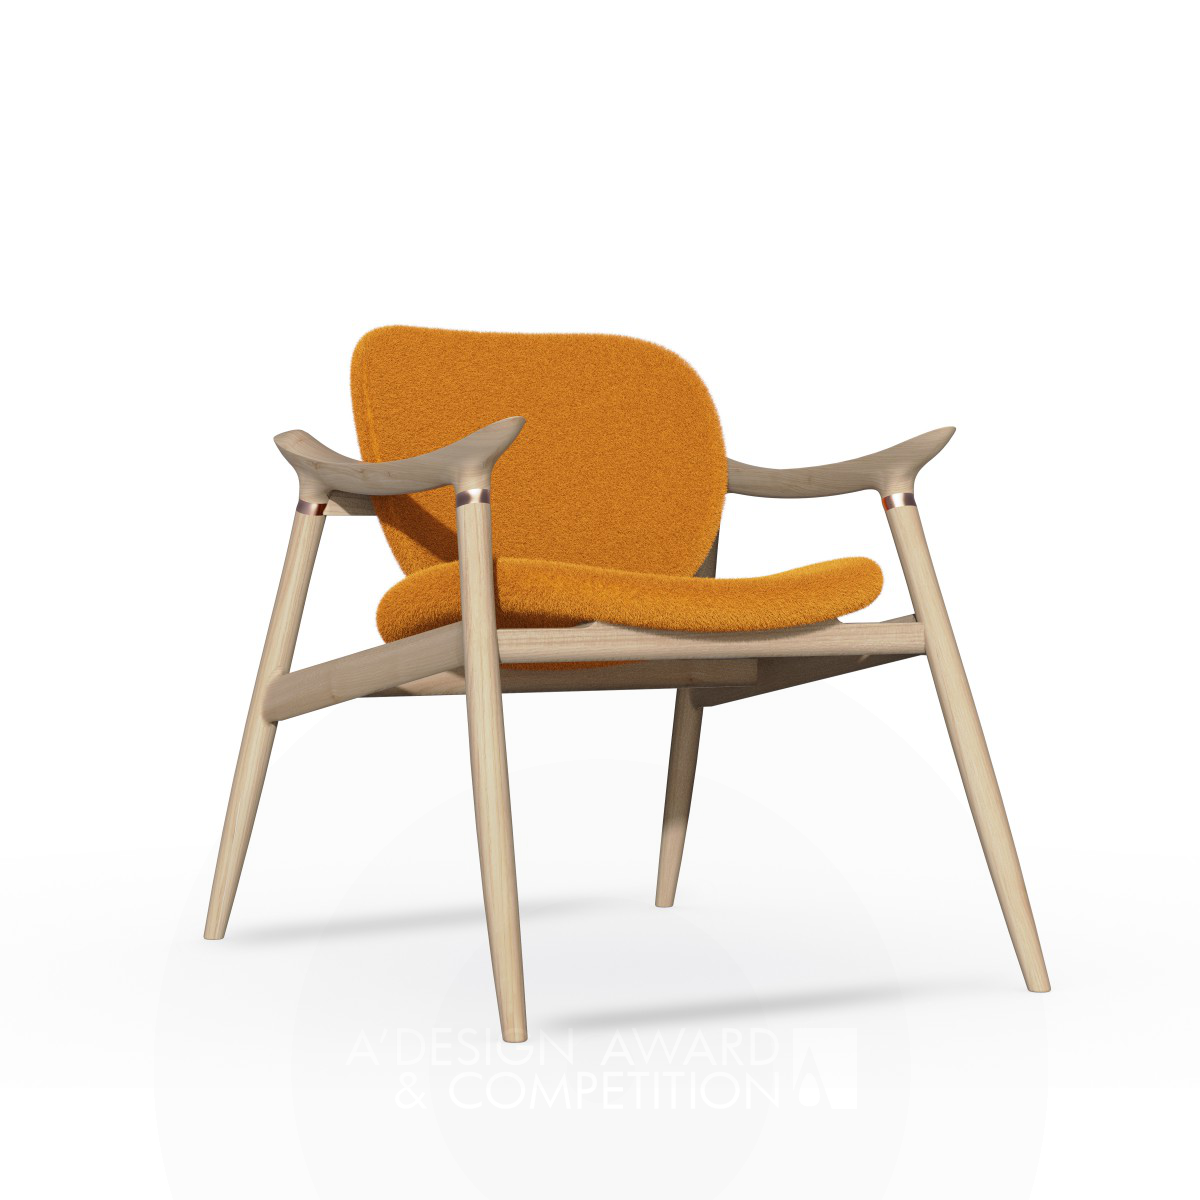 Traveler: A Sculptural Chair Inspired by Home